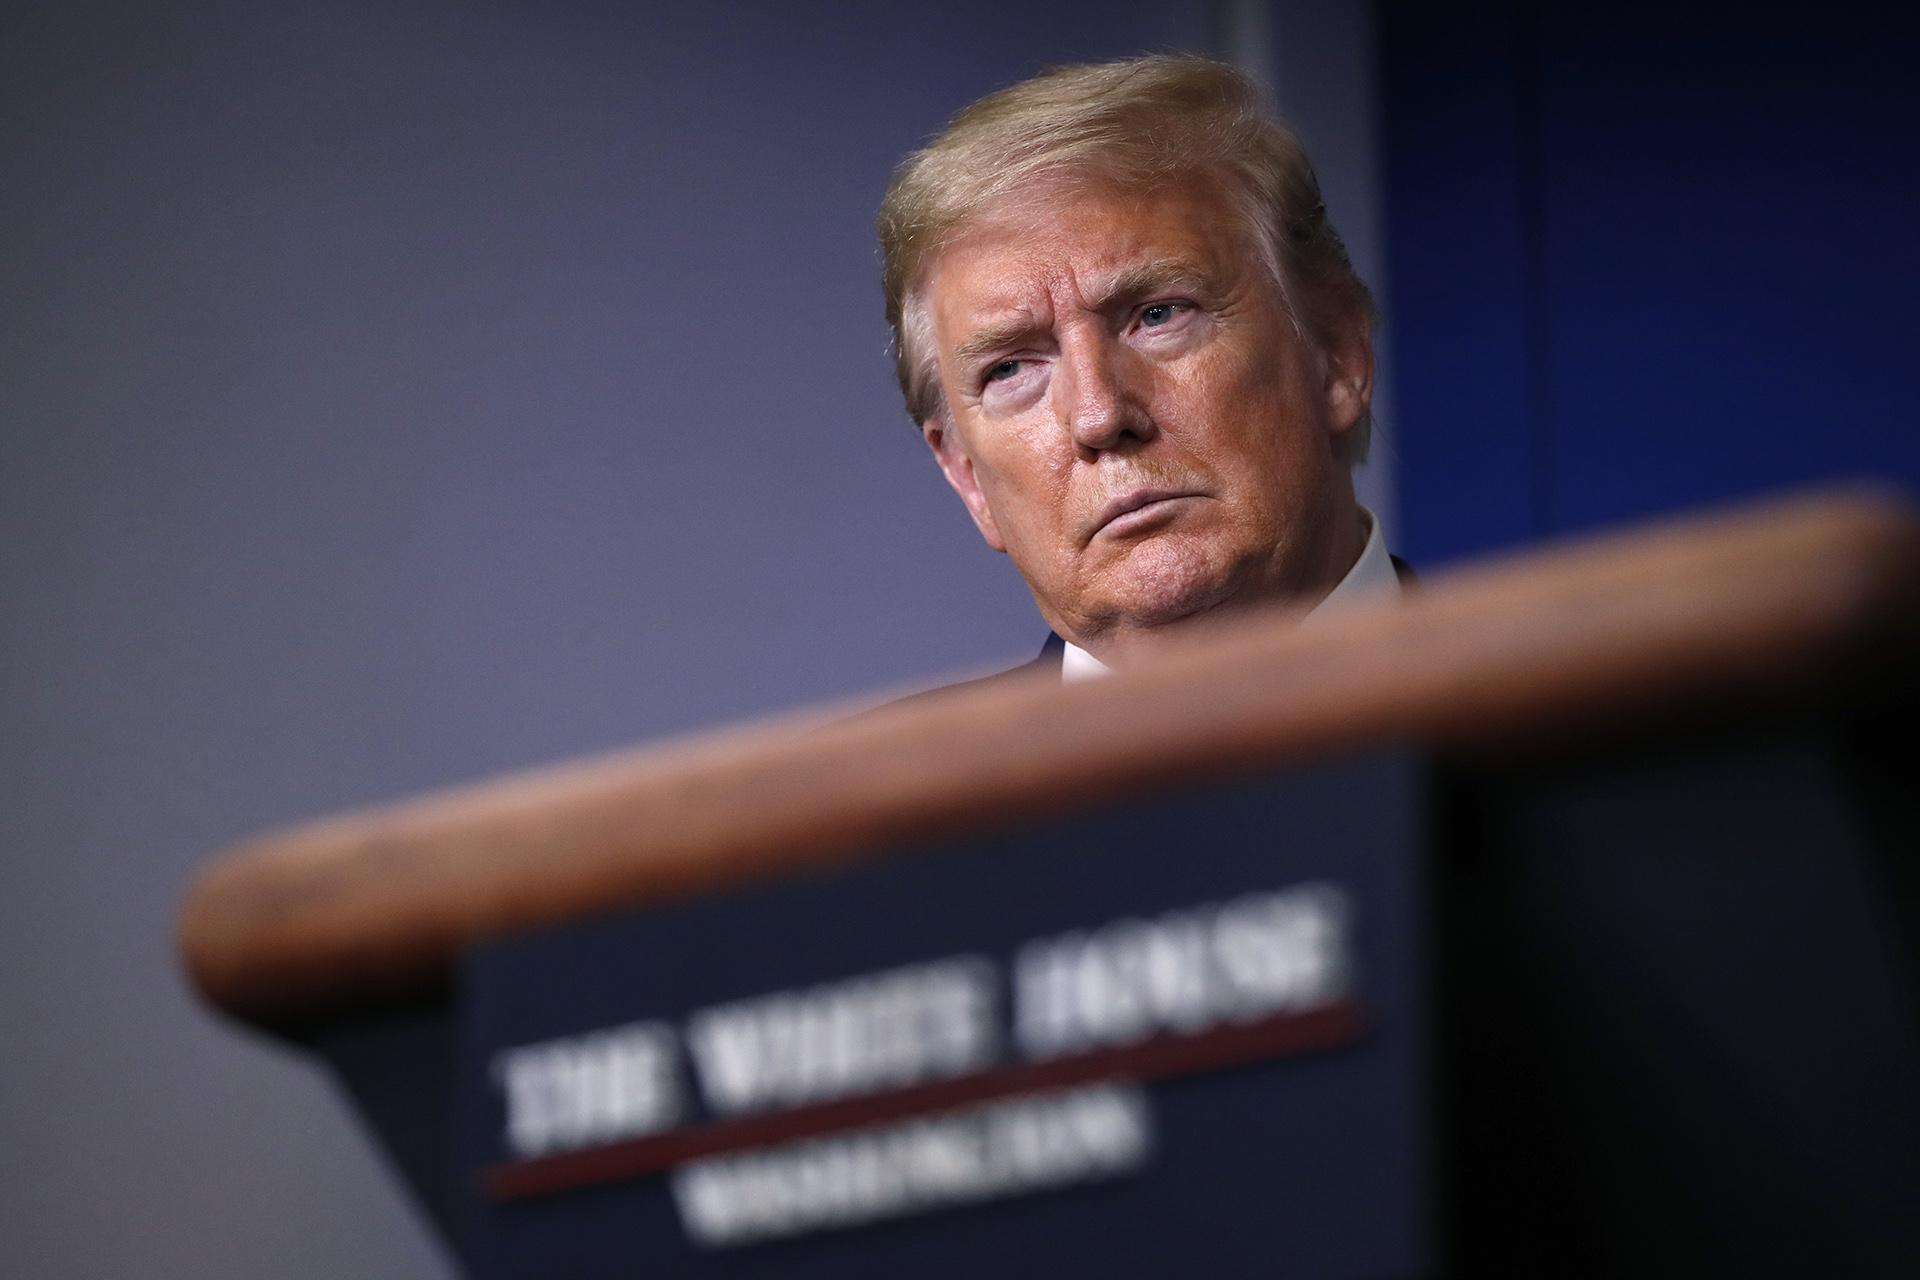 In this April 22, 2020, file photo, President Donald Trump listens during a briefing about the coronavirus in the James Brady Press Briefing Room of the White House, in Washington. (AP Photo / Alex Brandon, File)